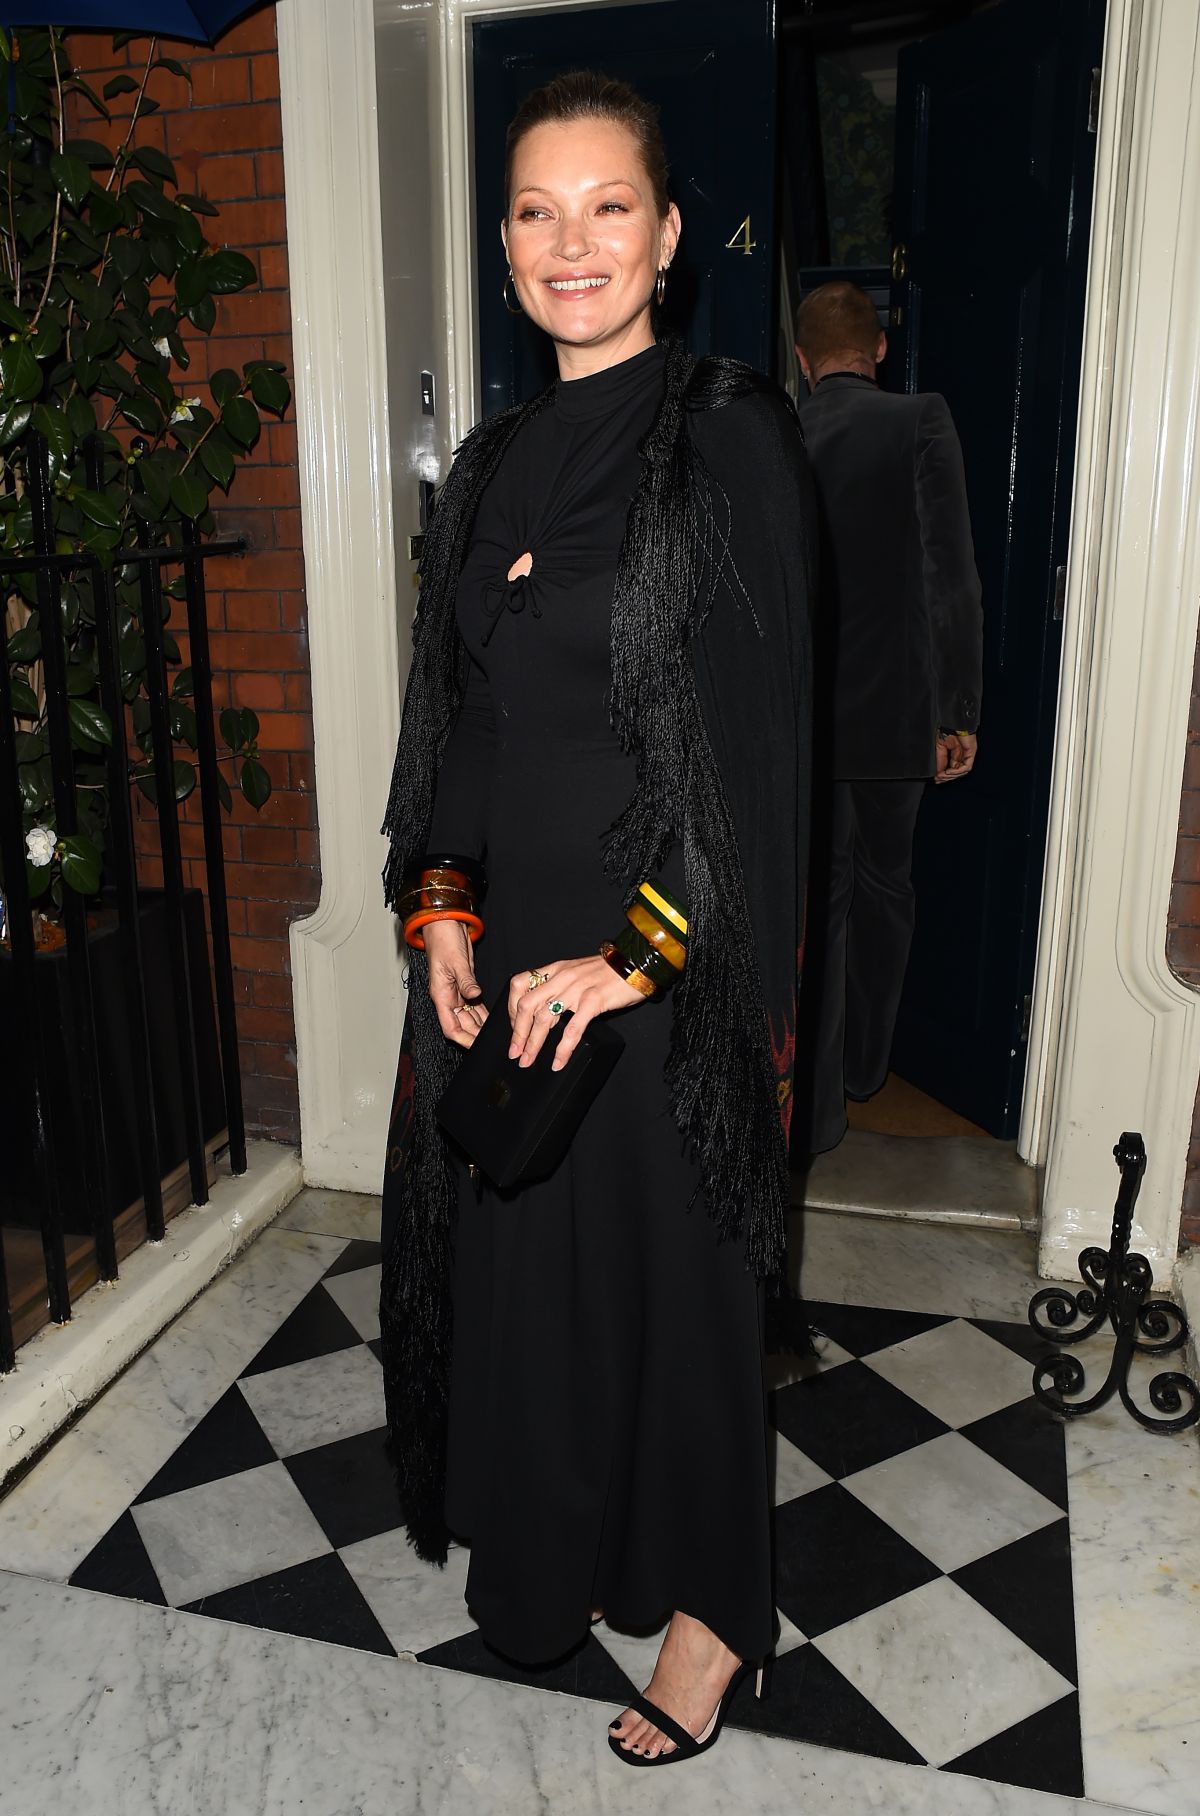 KATE MOSS at Mark’s Club in London 03/22/2018 – HawtCelebs